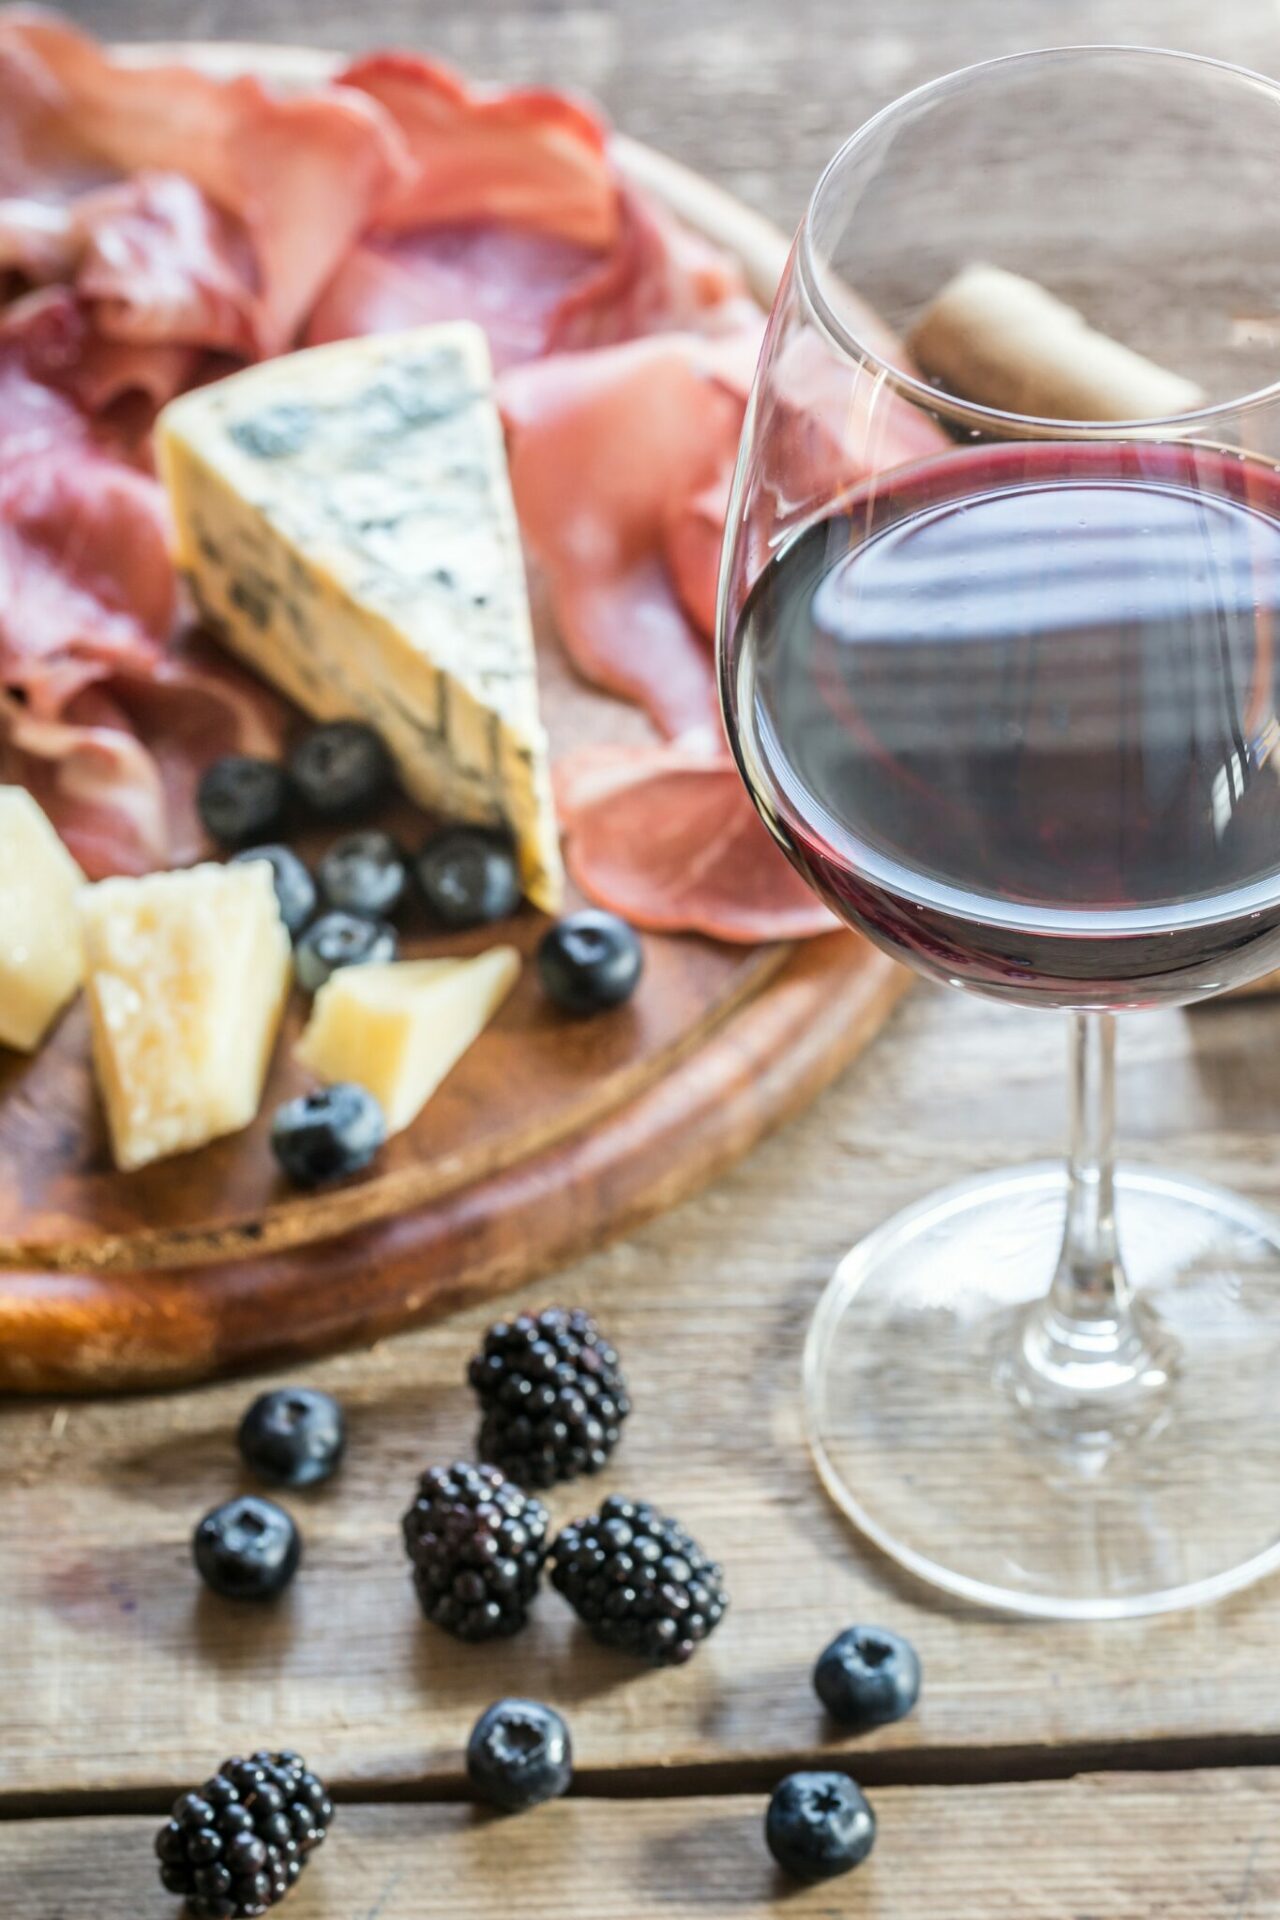 A glass of Malbec wine with food on a table